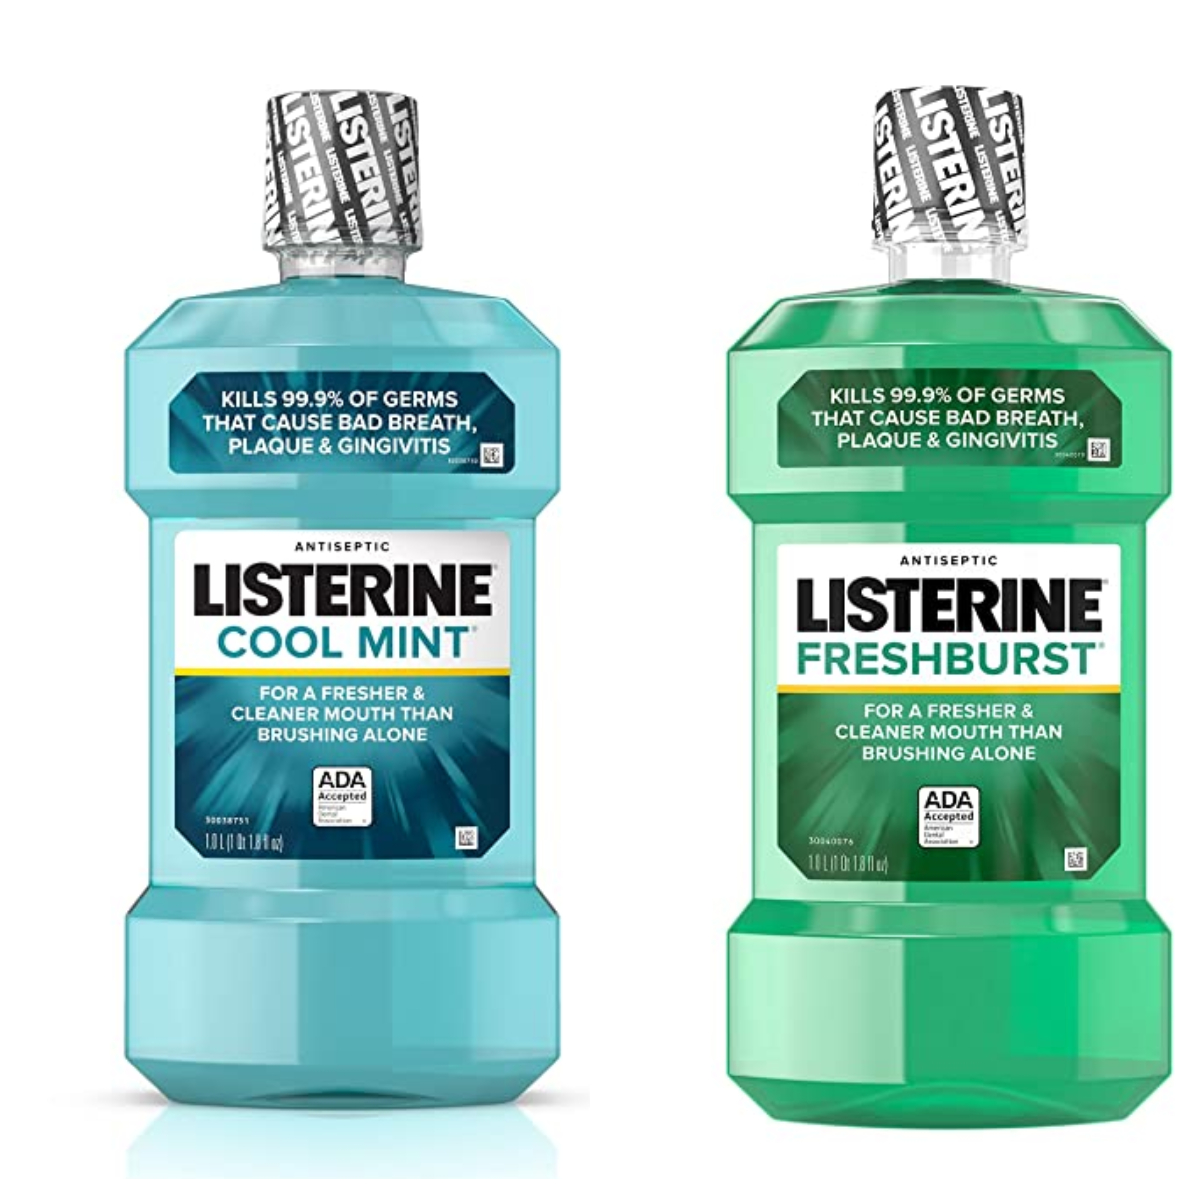 3 Bottles of Listerine Cool Mint Antiseptic Mouthwash (1 L) for Only $8 ...